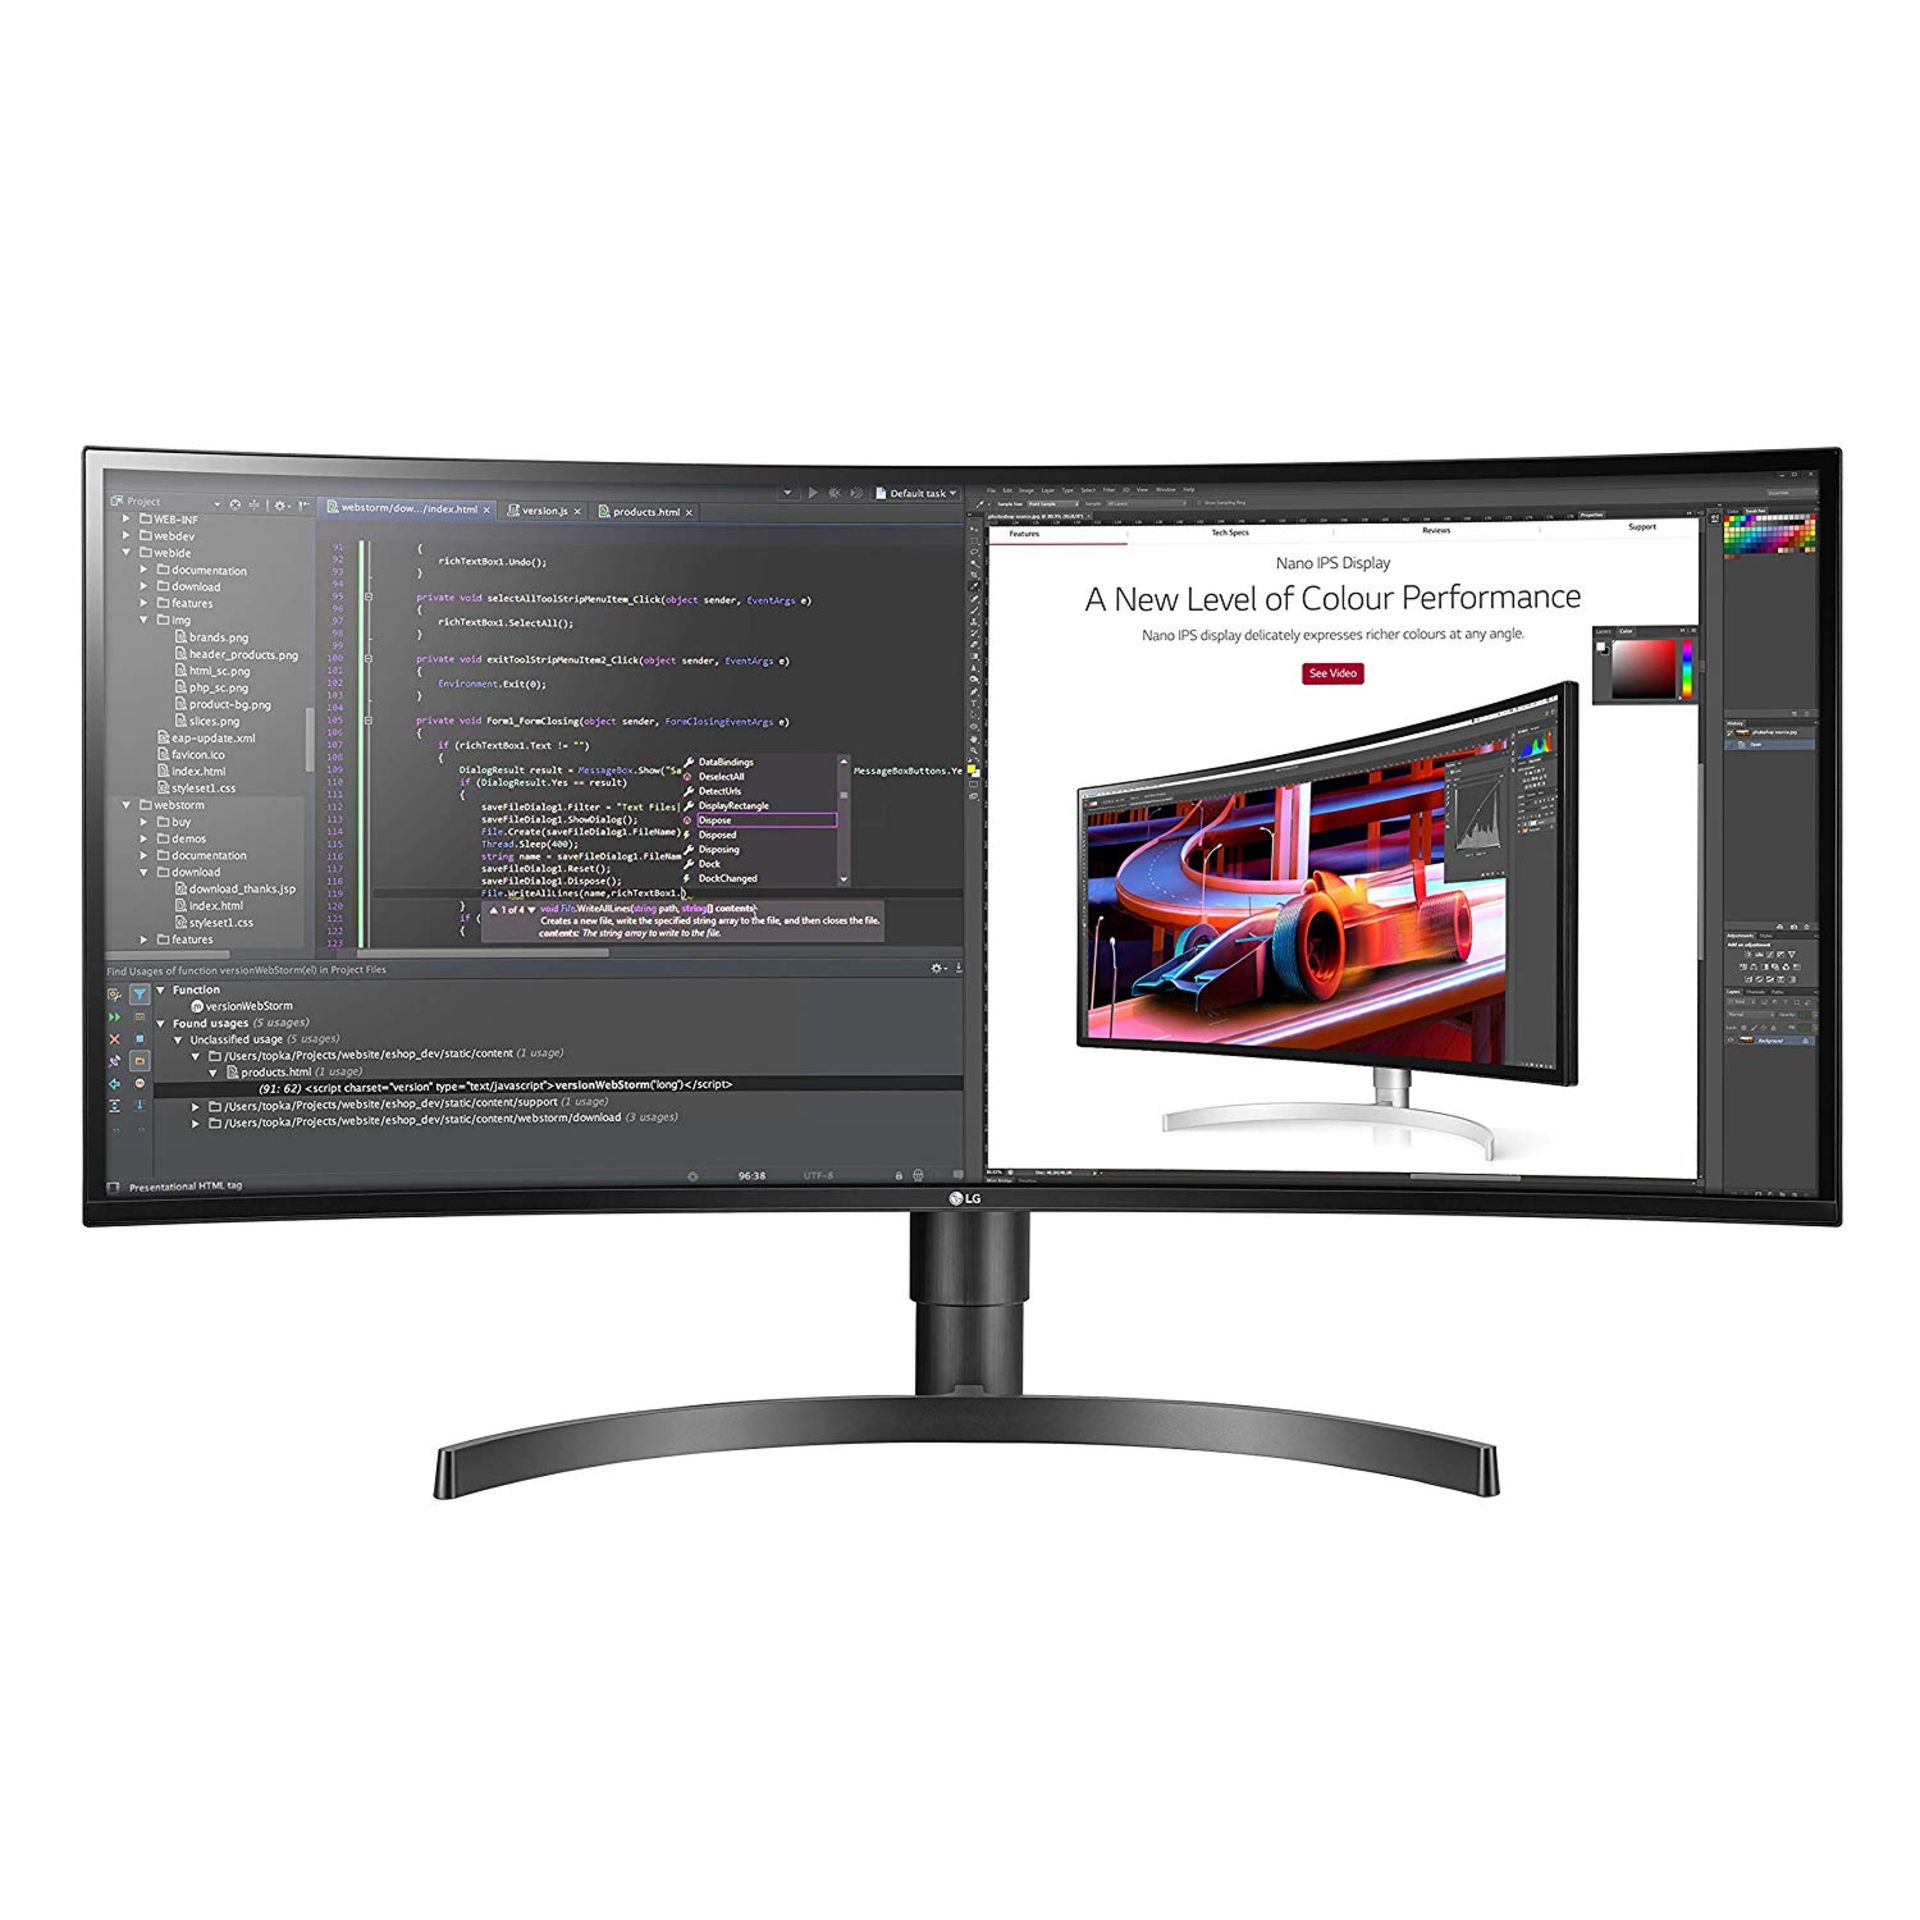 V Grade A LG 34 Inch CURVED ULTRA WIDE WQHD IPS LED MONITOR - 3440 X 1440P - BUILT IN SPEAKERS -